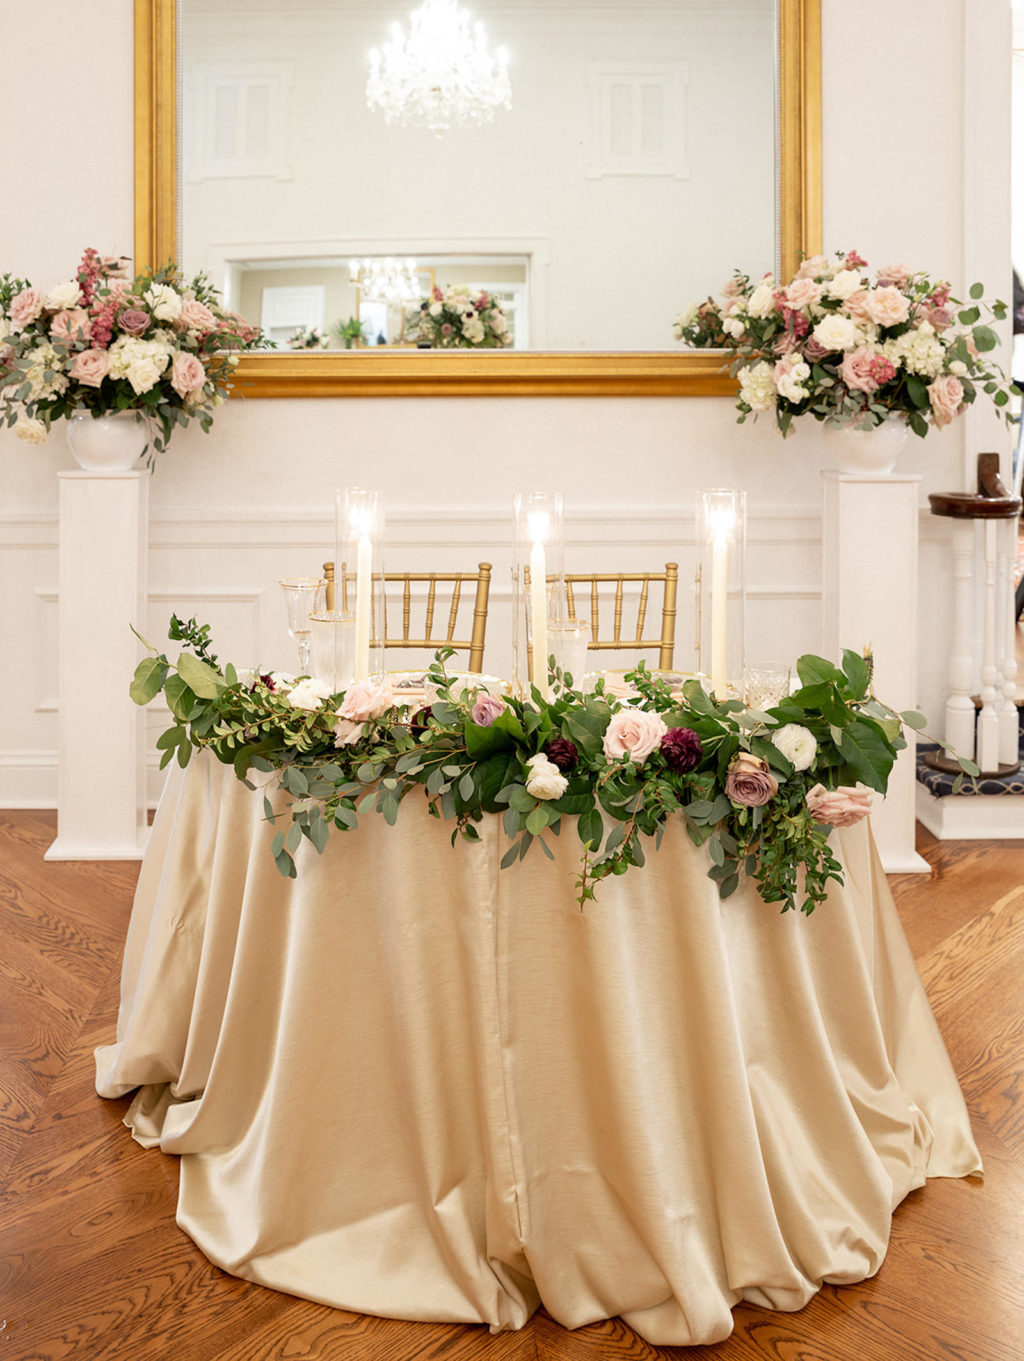 Classic Wedding Reception Decor, Sweetheart Table Champagne Table Linen, Greenery Garland with Mauve and White Roses, Candlesticks, Gold Chiavari Chairs | Tampa Bay Wedding Rentals Kate Ryan Event Rentals